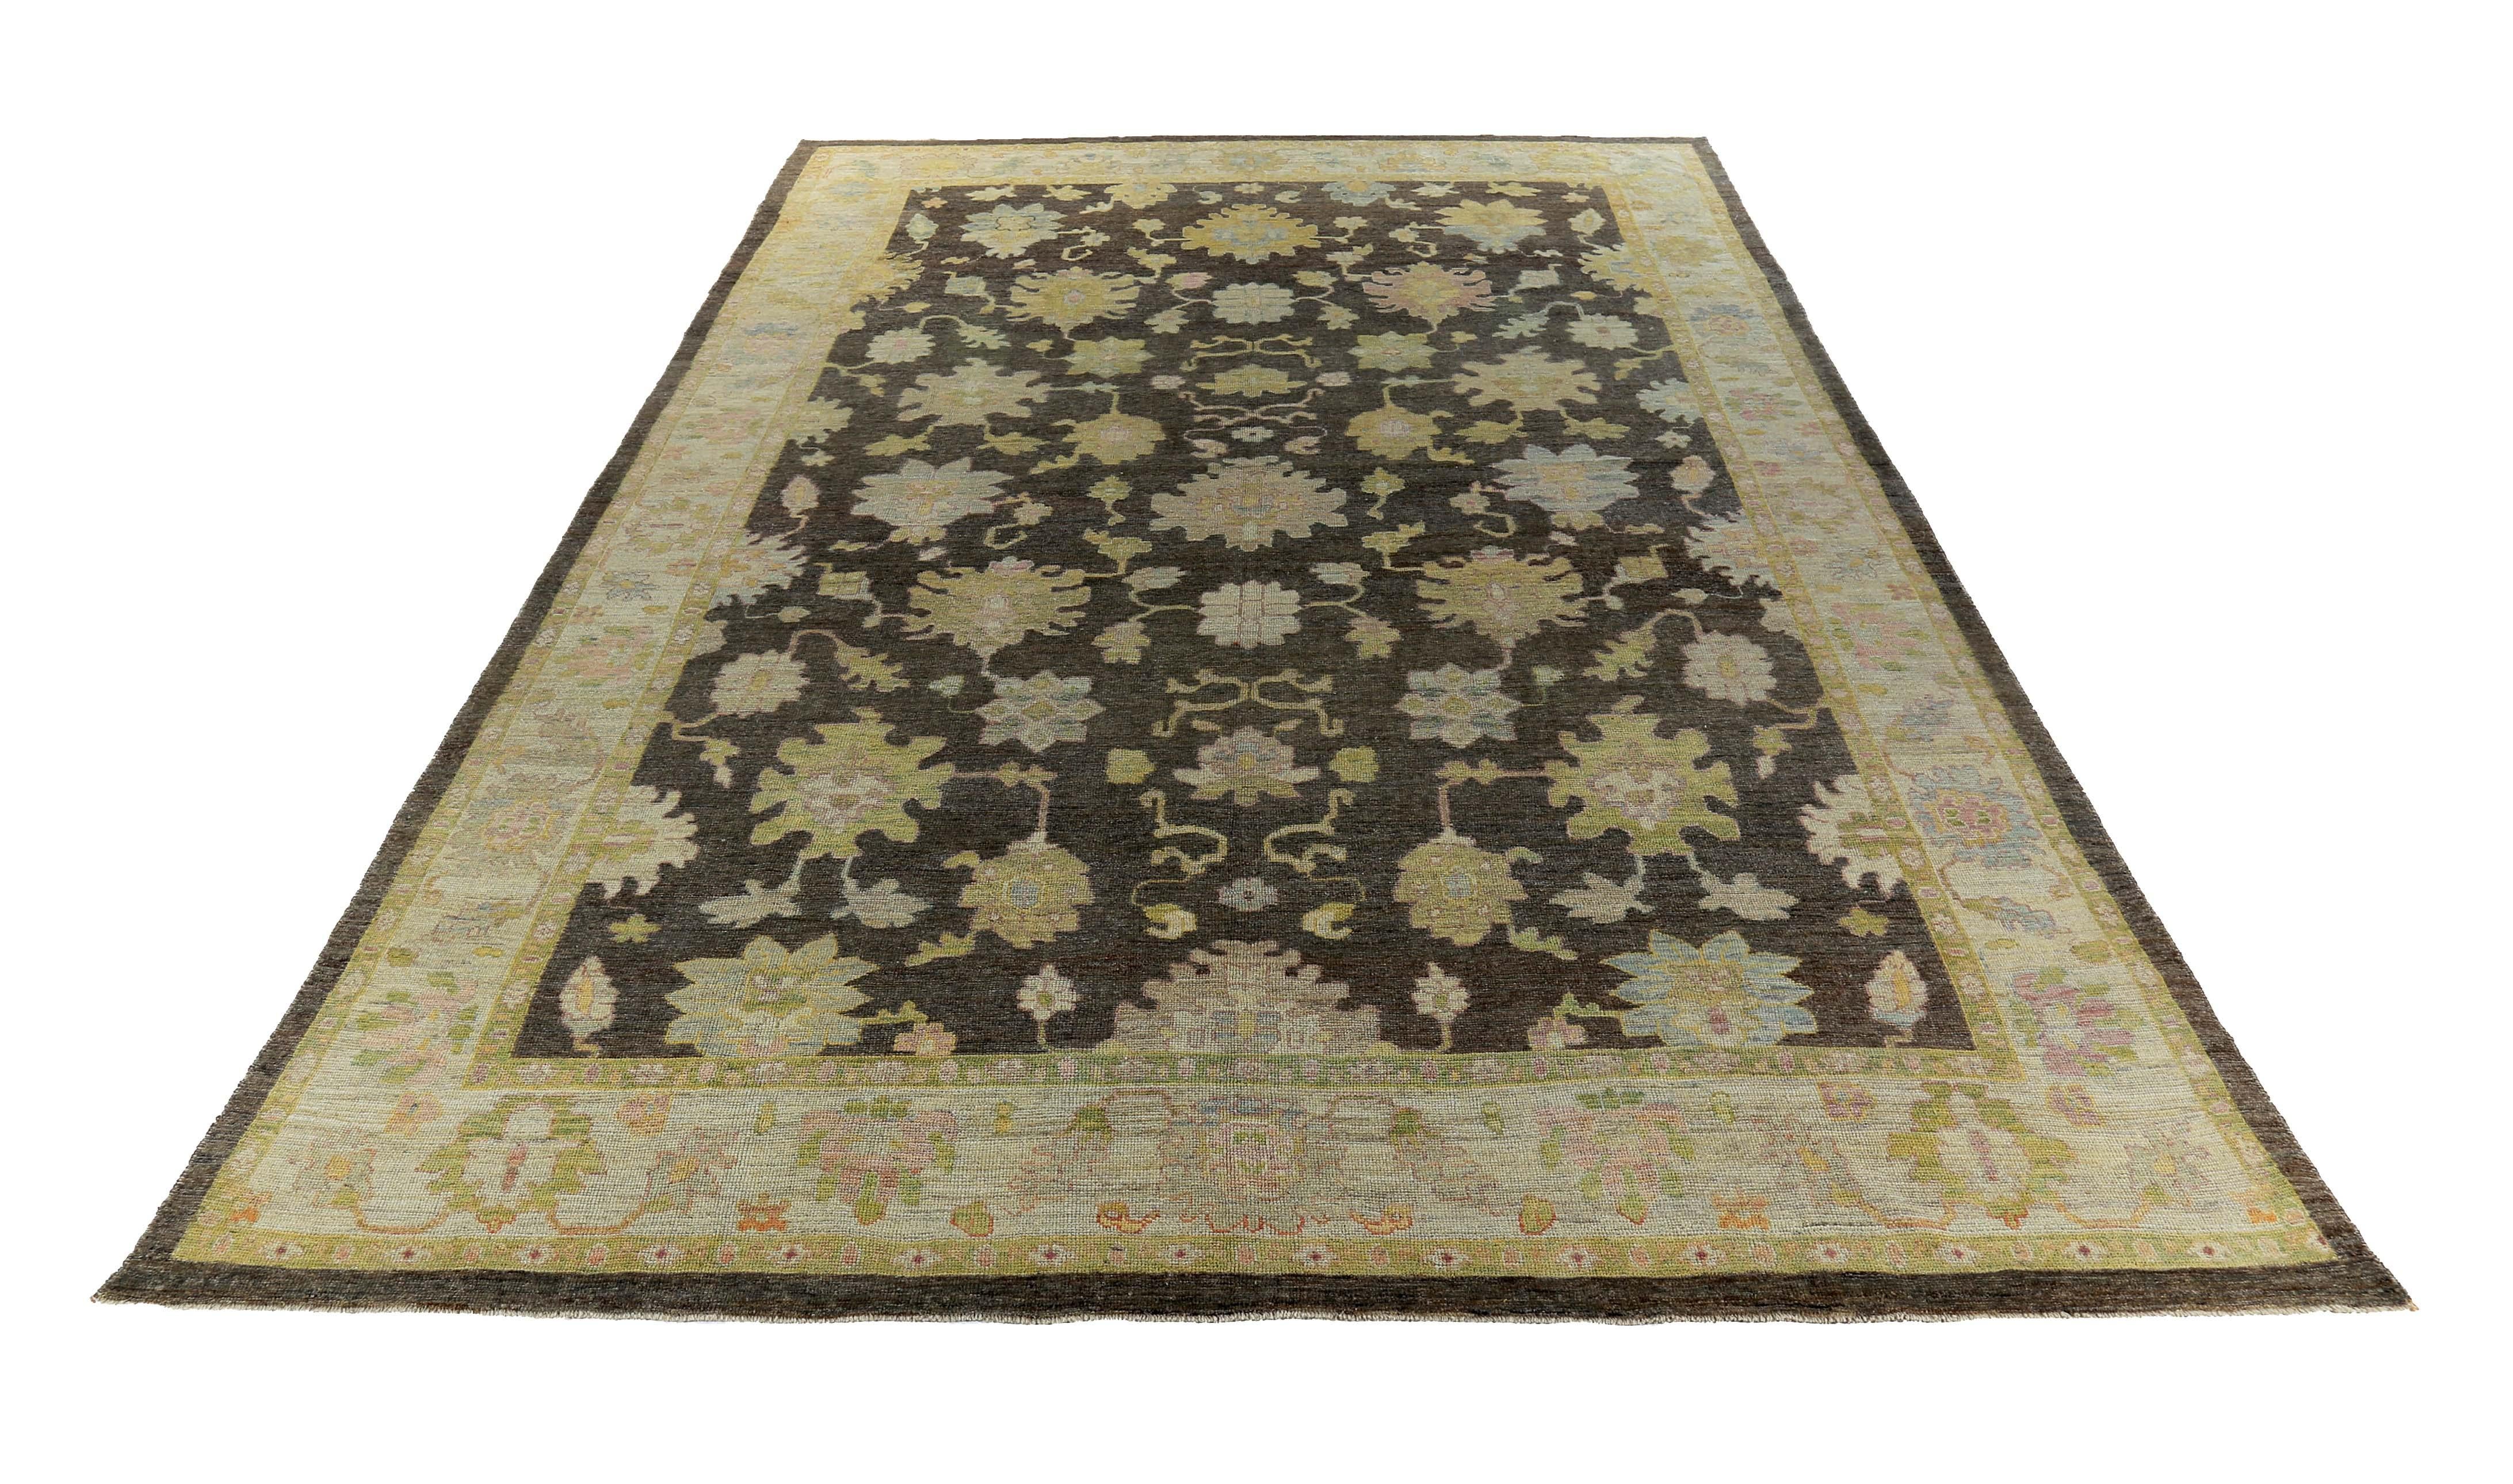 New Turkish rug made of handwoven sheep’s wool of the finest quality. It’s colored with organic vegetable dyes that are certified safe for humans and pets alike. It features green and blue floral details on a lovely ivory field. Flower patterns are